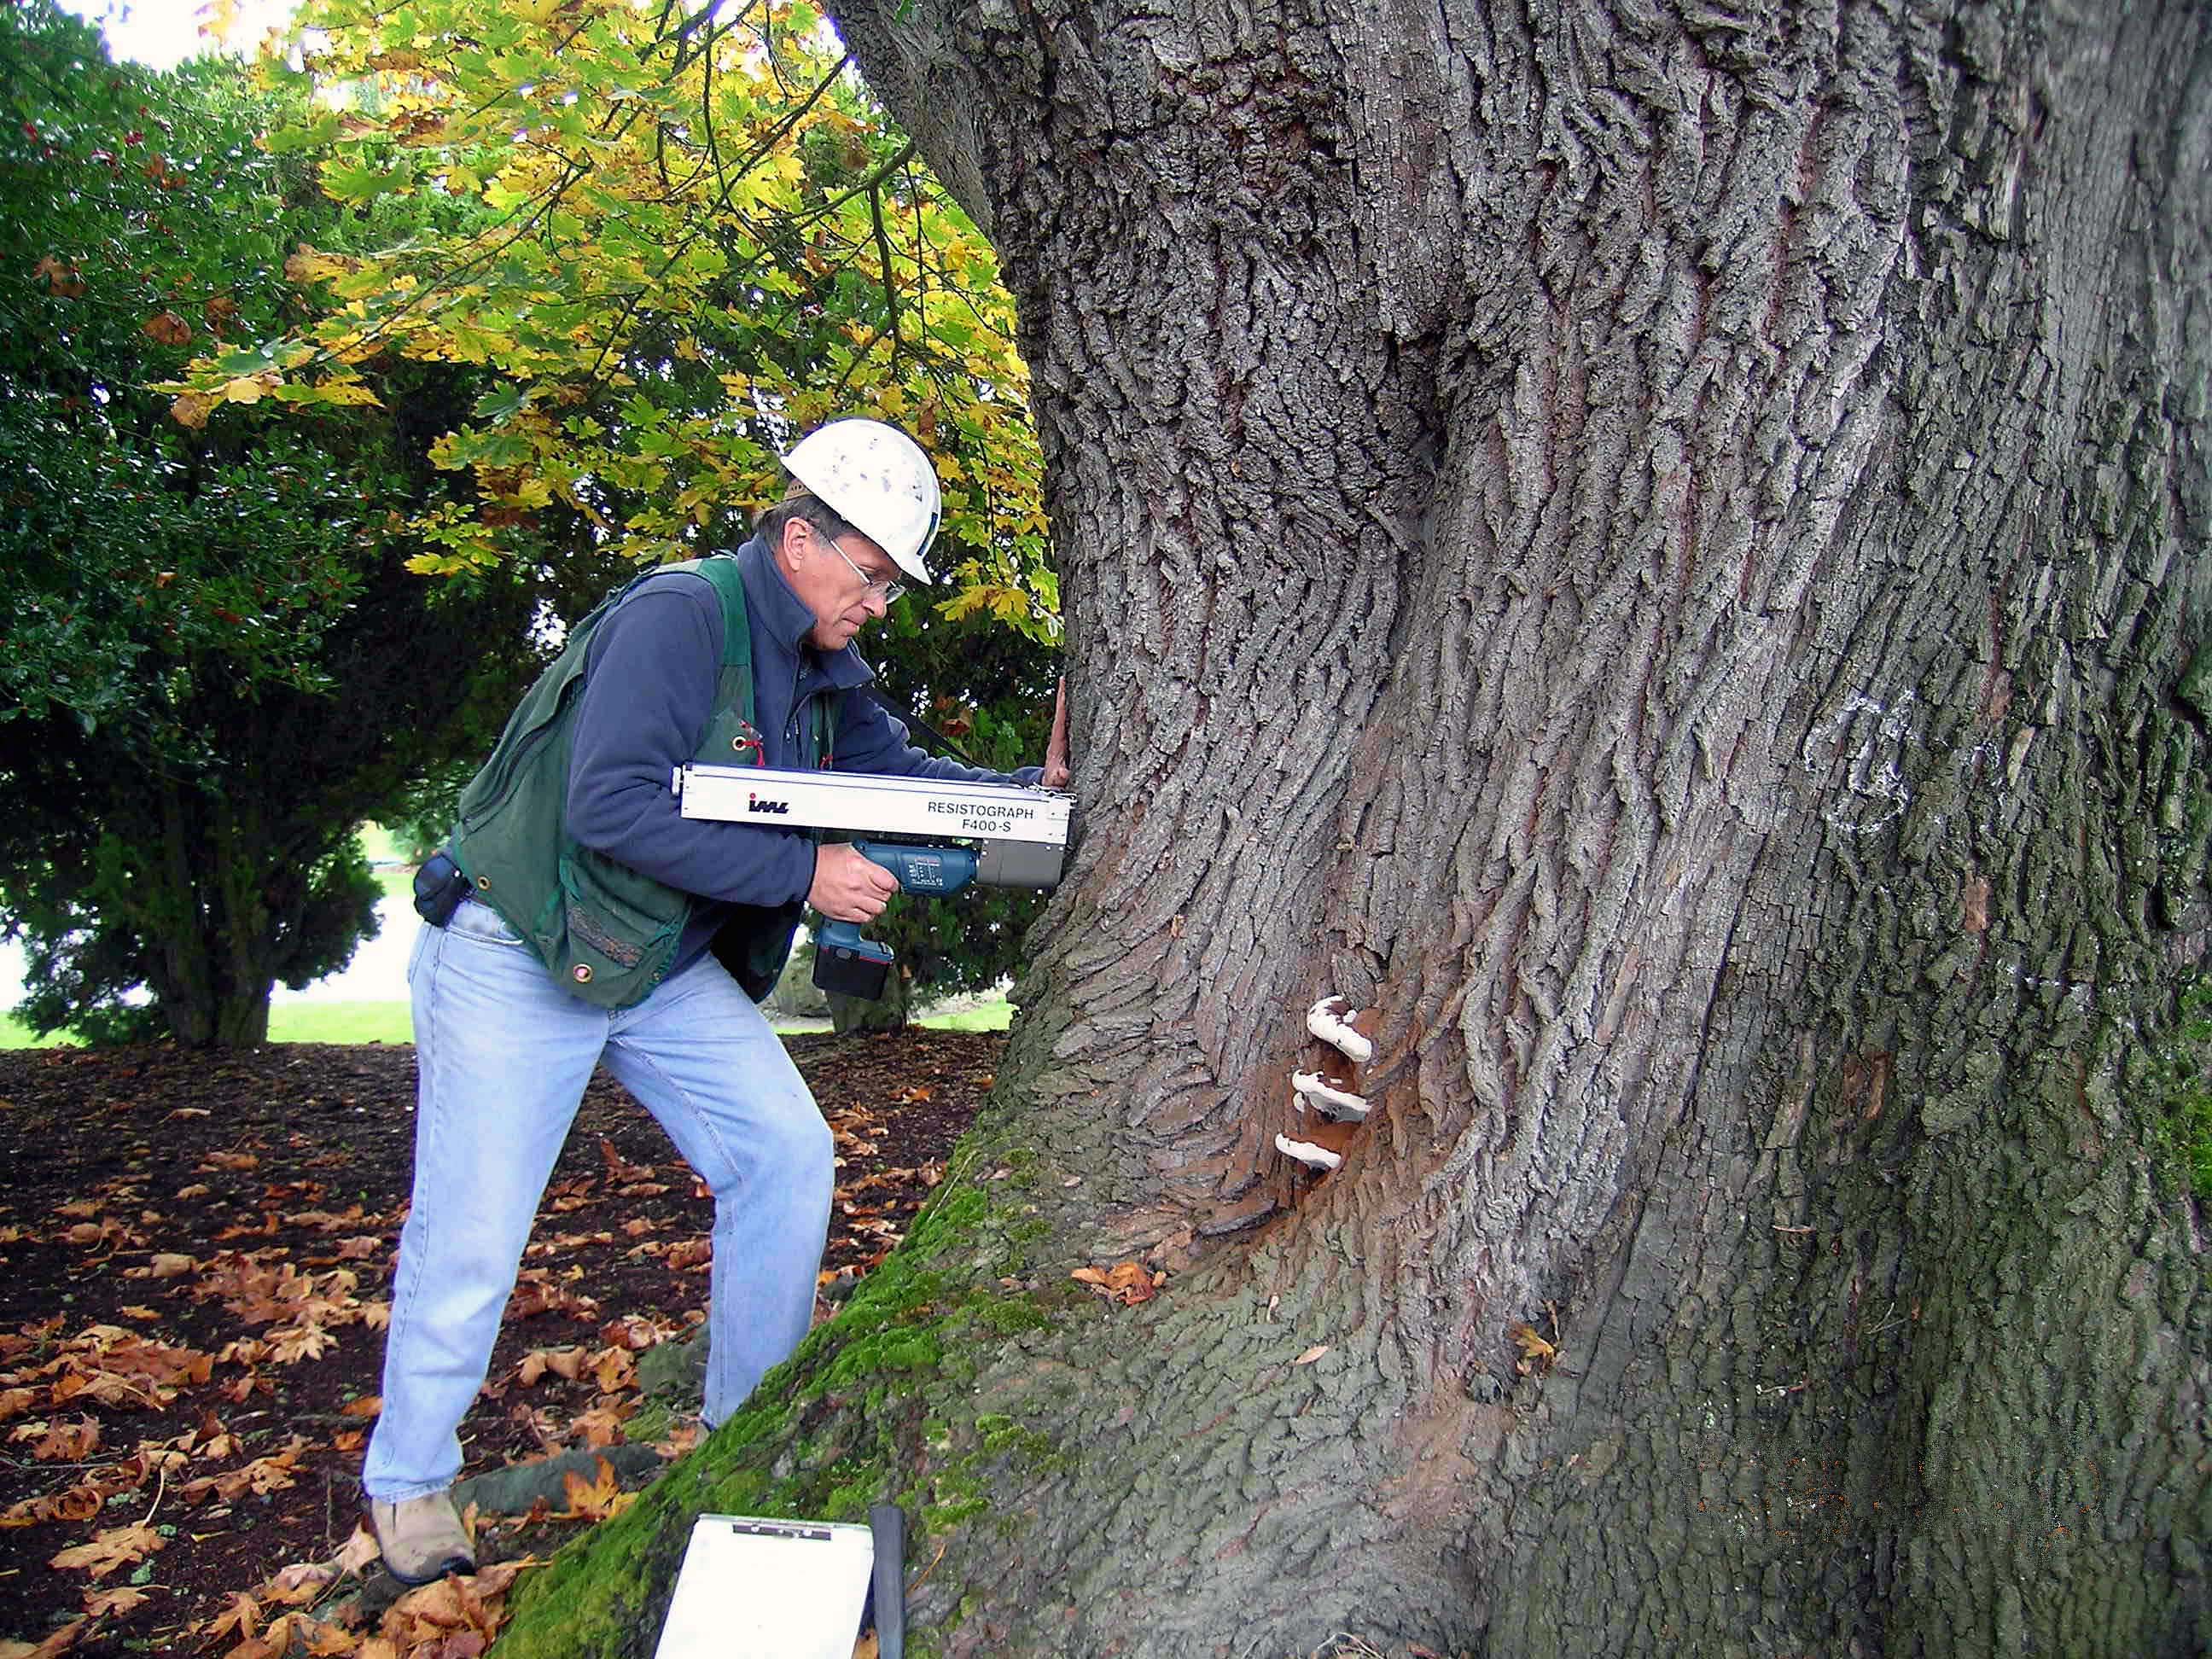 Jim Working with the Resistograph - Urban Forestry Services, Inc.